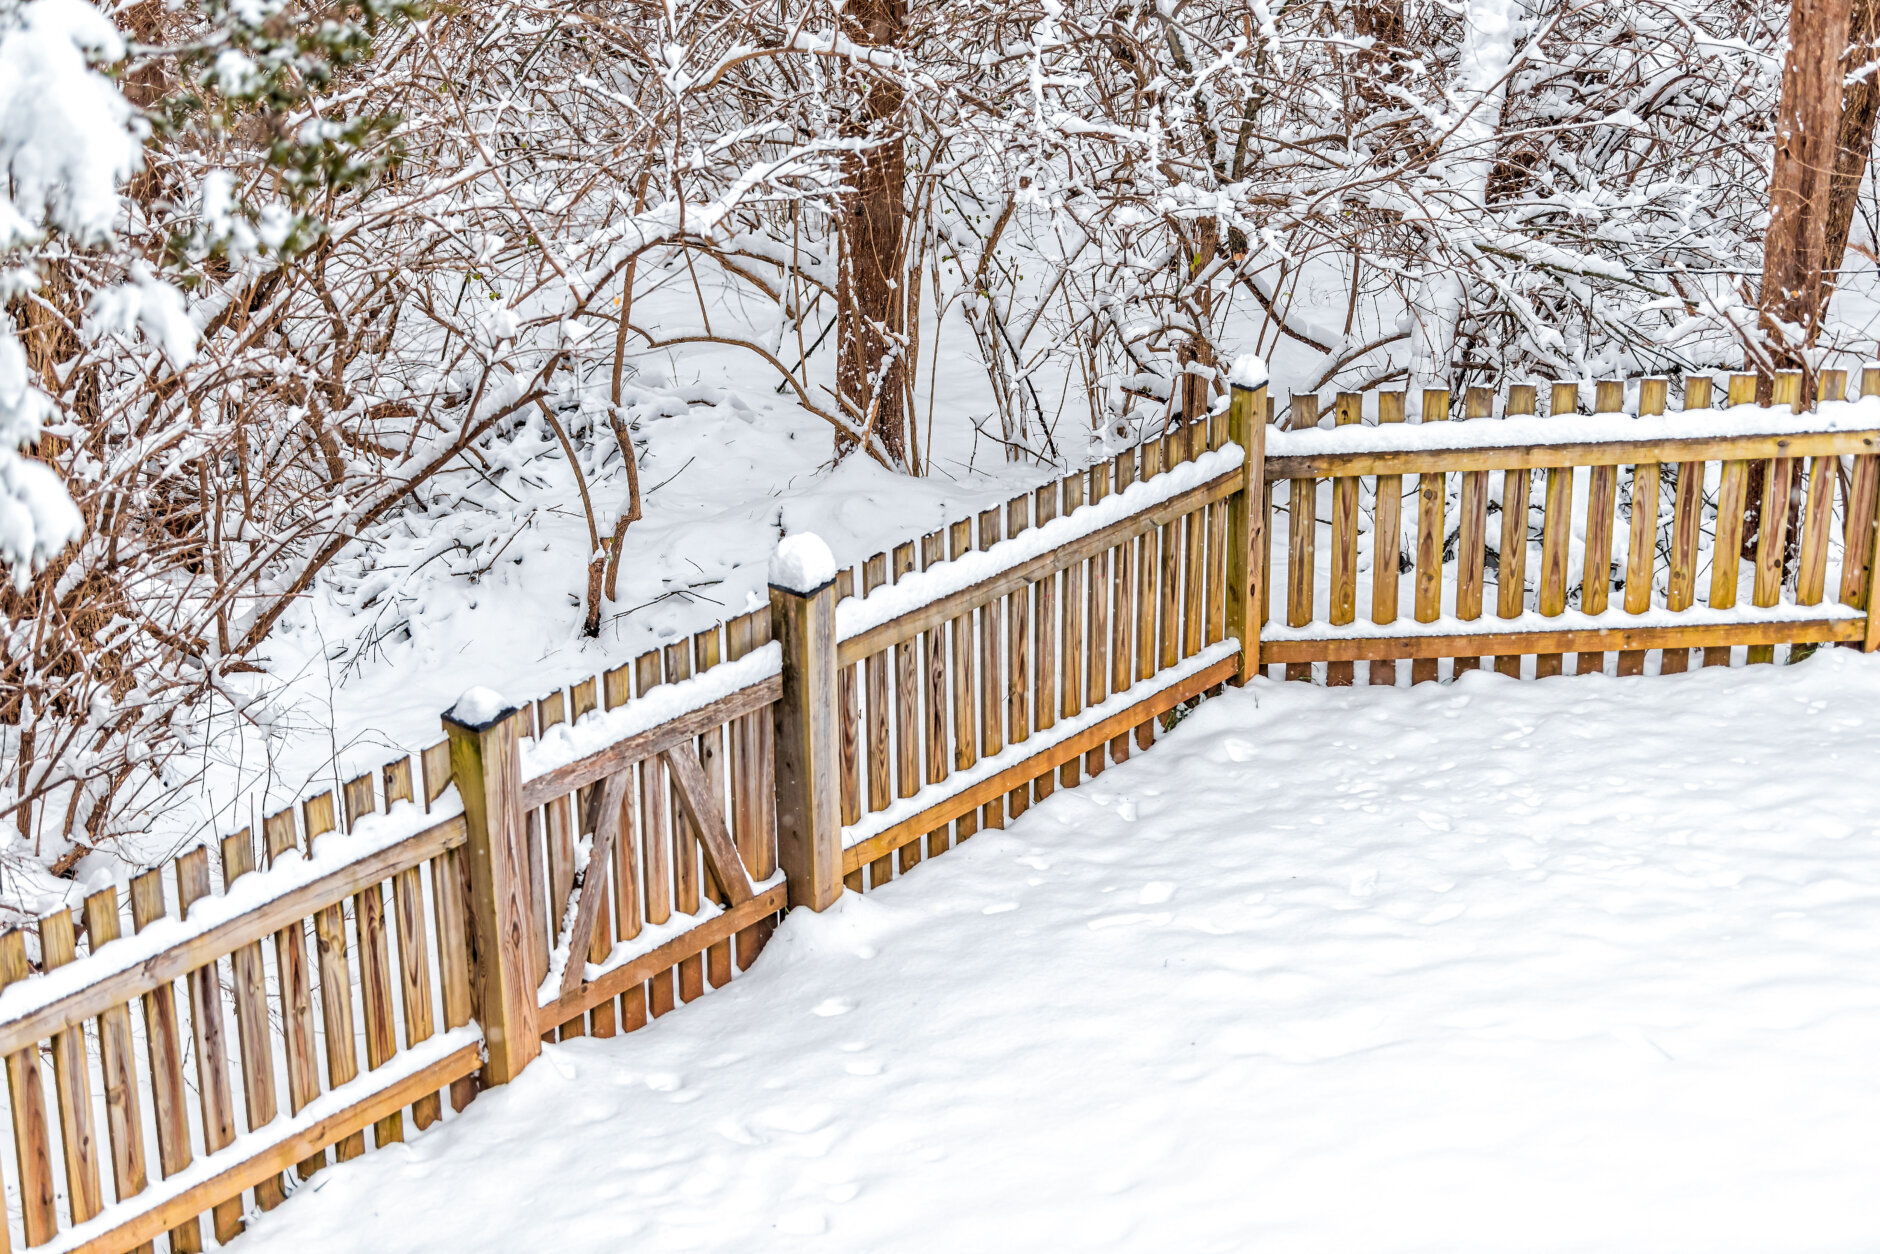 Wooden backyard fence of house with trees forest in neighborhood with snow covered ground during blizzard white storm snowflakes and small gate door